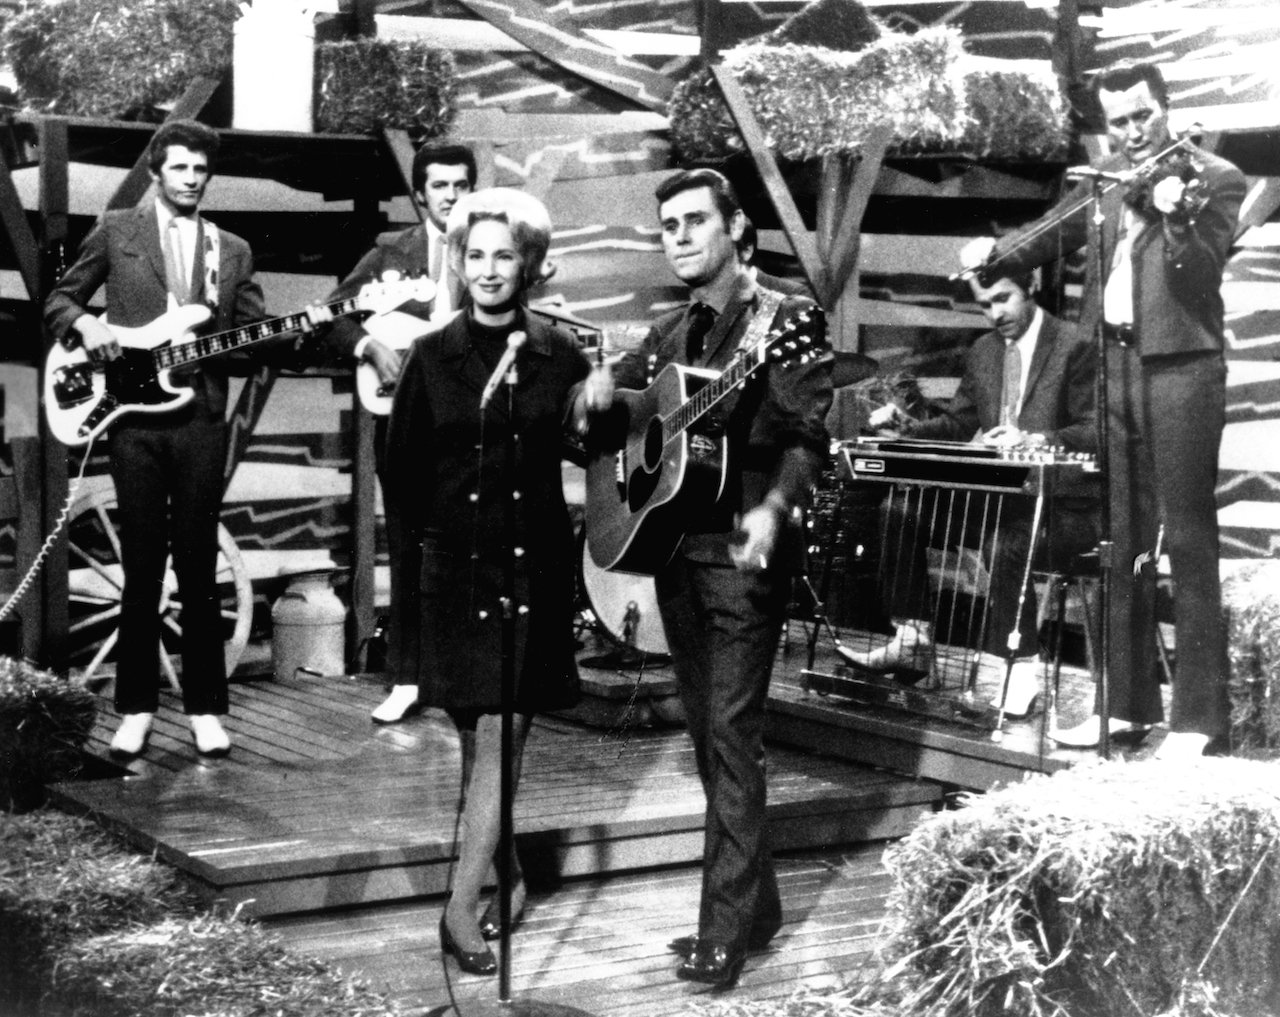 Tammy Wynette and George Jones perform on stage with the Jones Boys circa 1972.